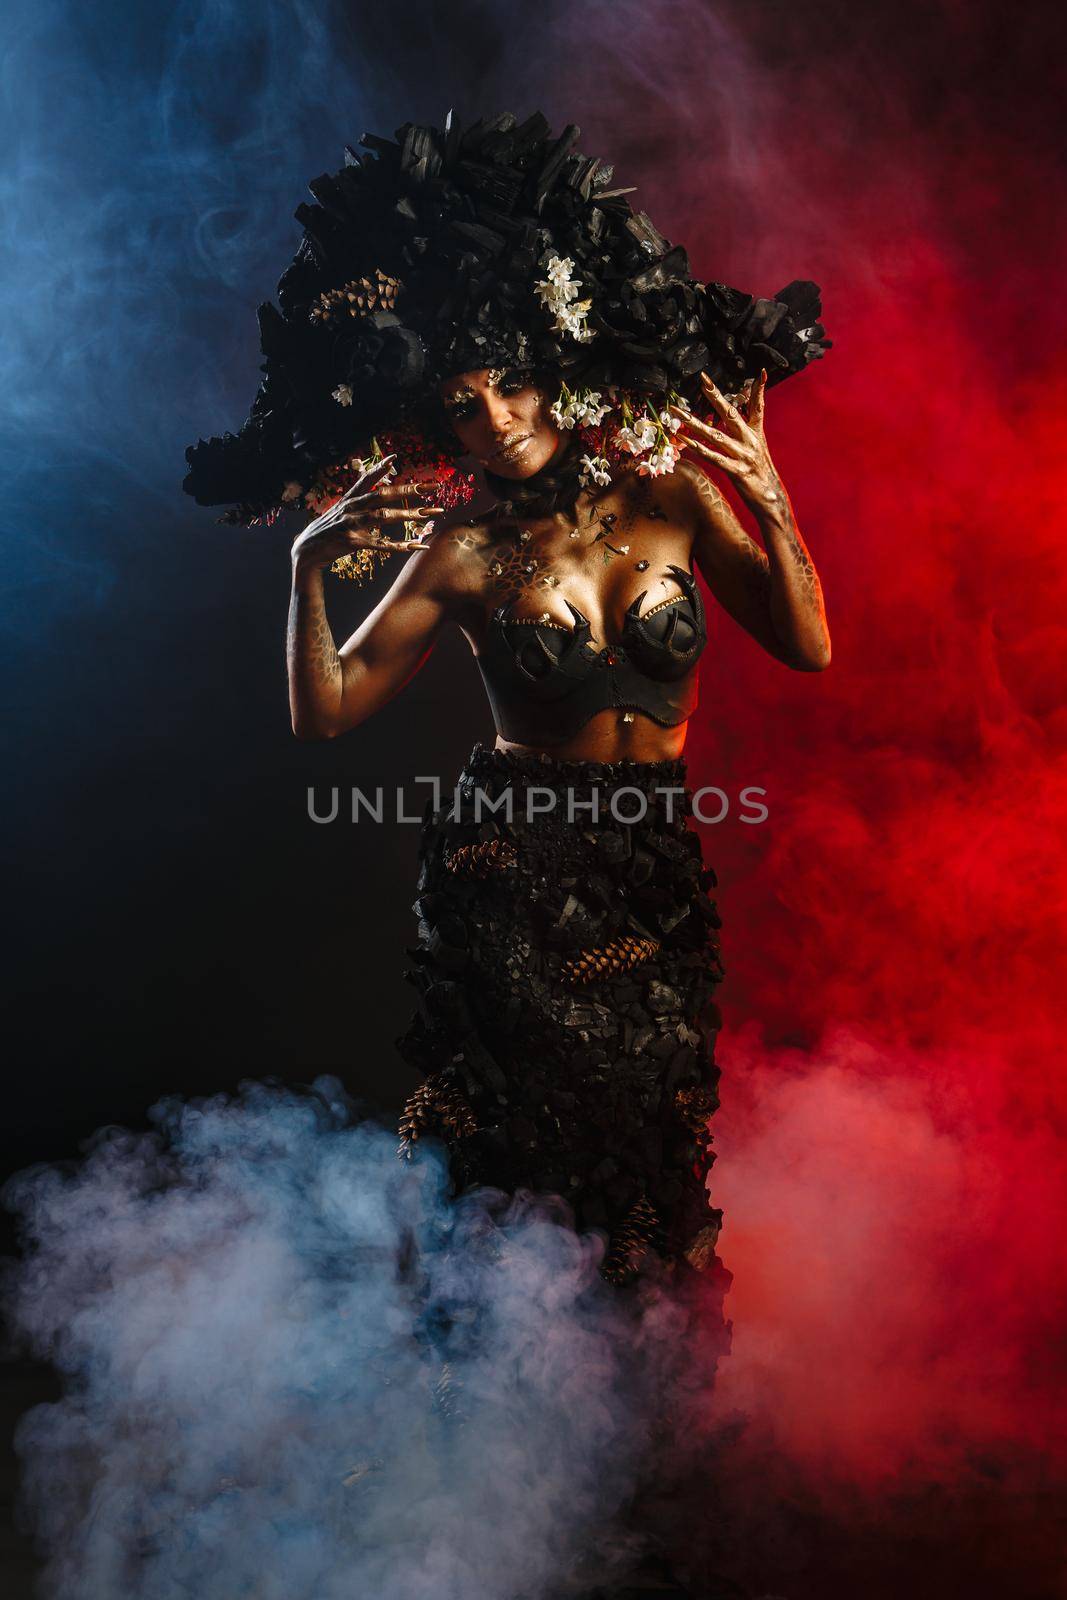 Portrait of a model in a headdress and dress made of coal. There is red smoke behind the model by deandy